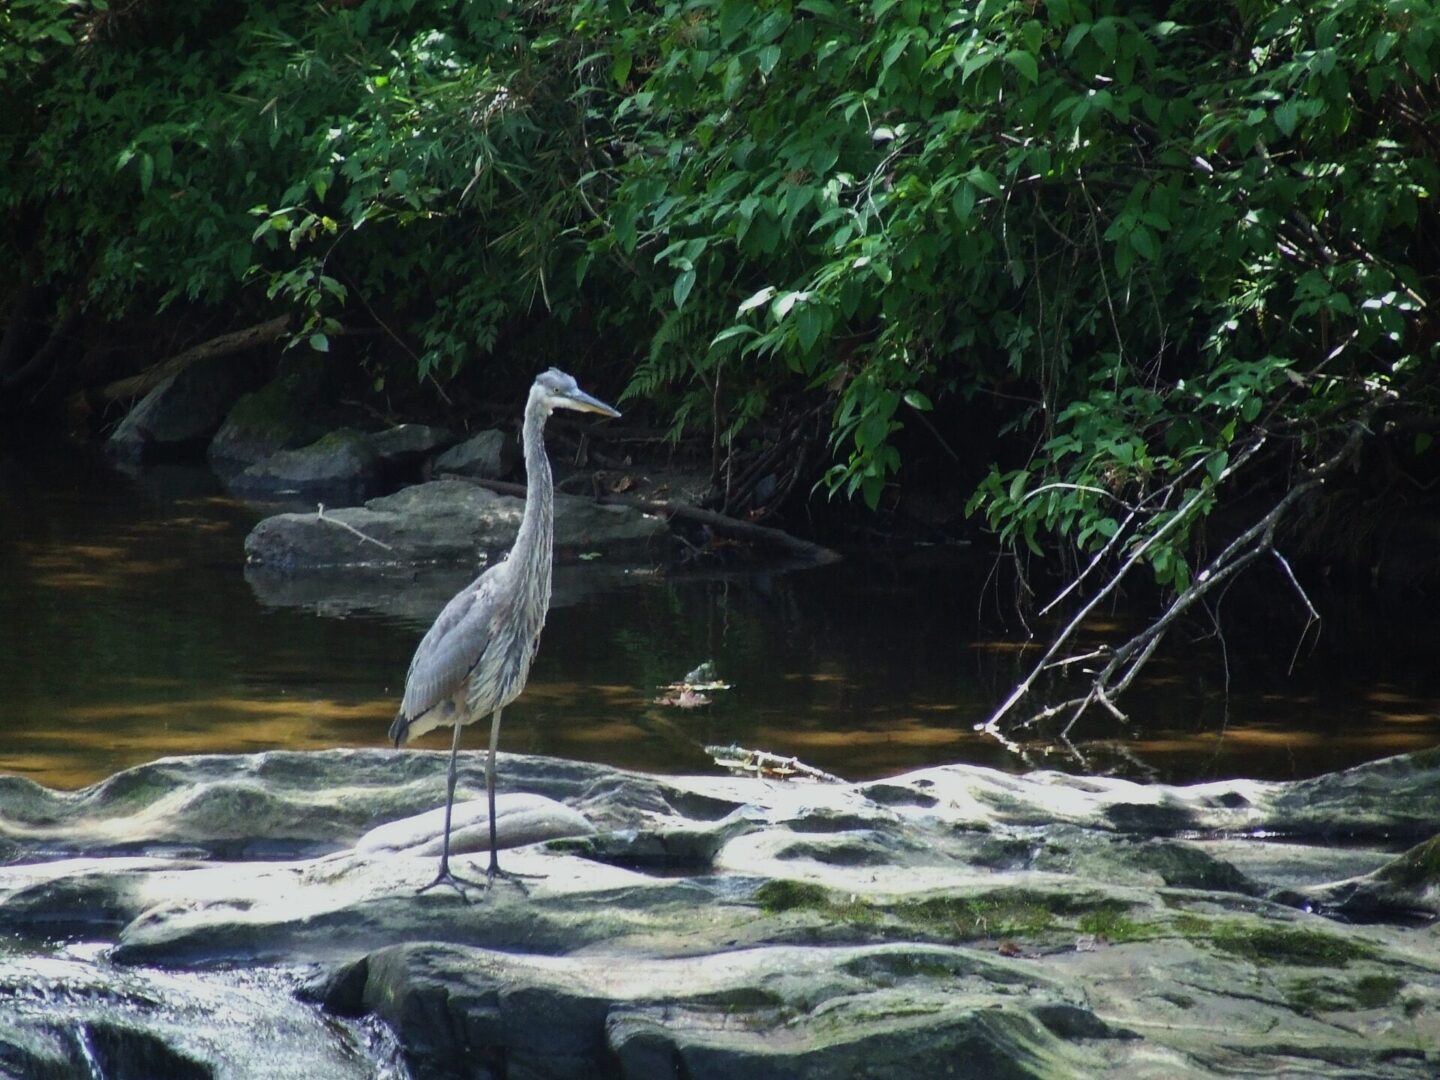 A Great Blue Heron standing on a rock